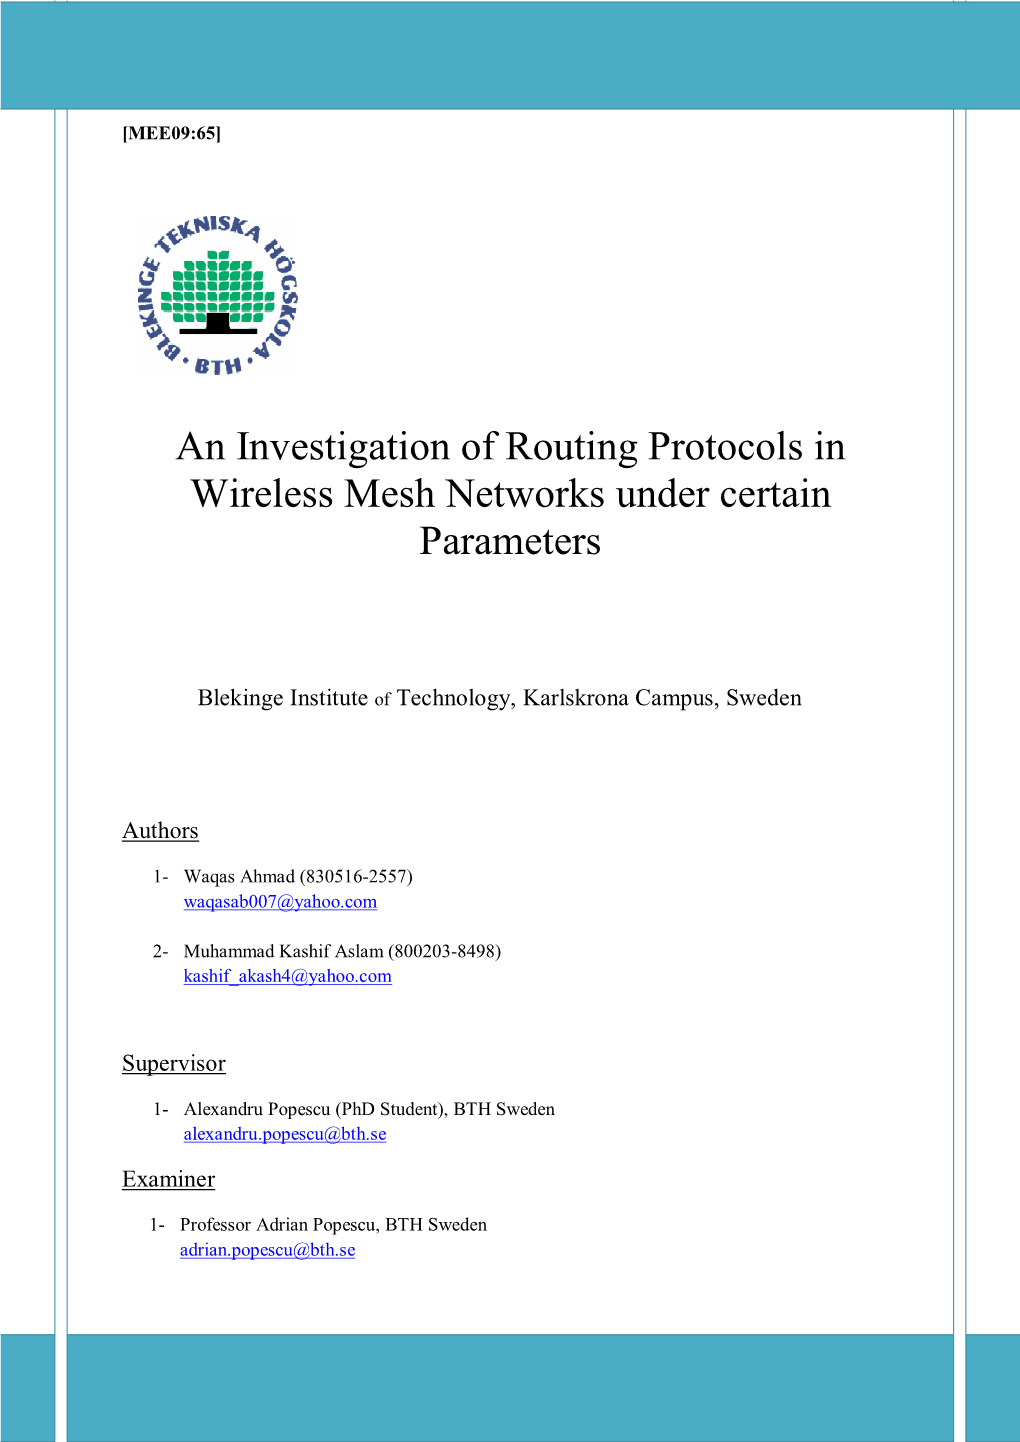 An Investigation of Routing Protocols in Wireless Mesh Networks Under Certain Parameters